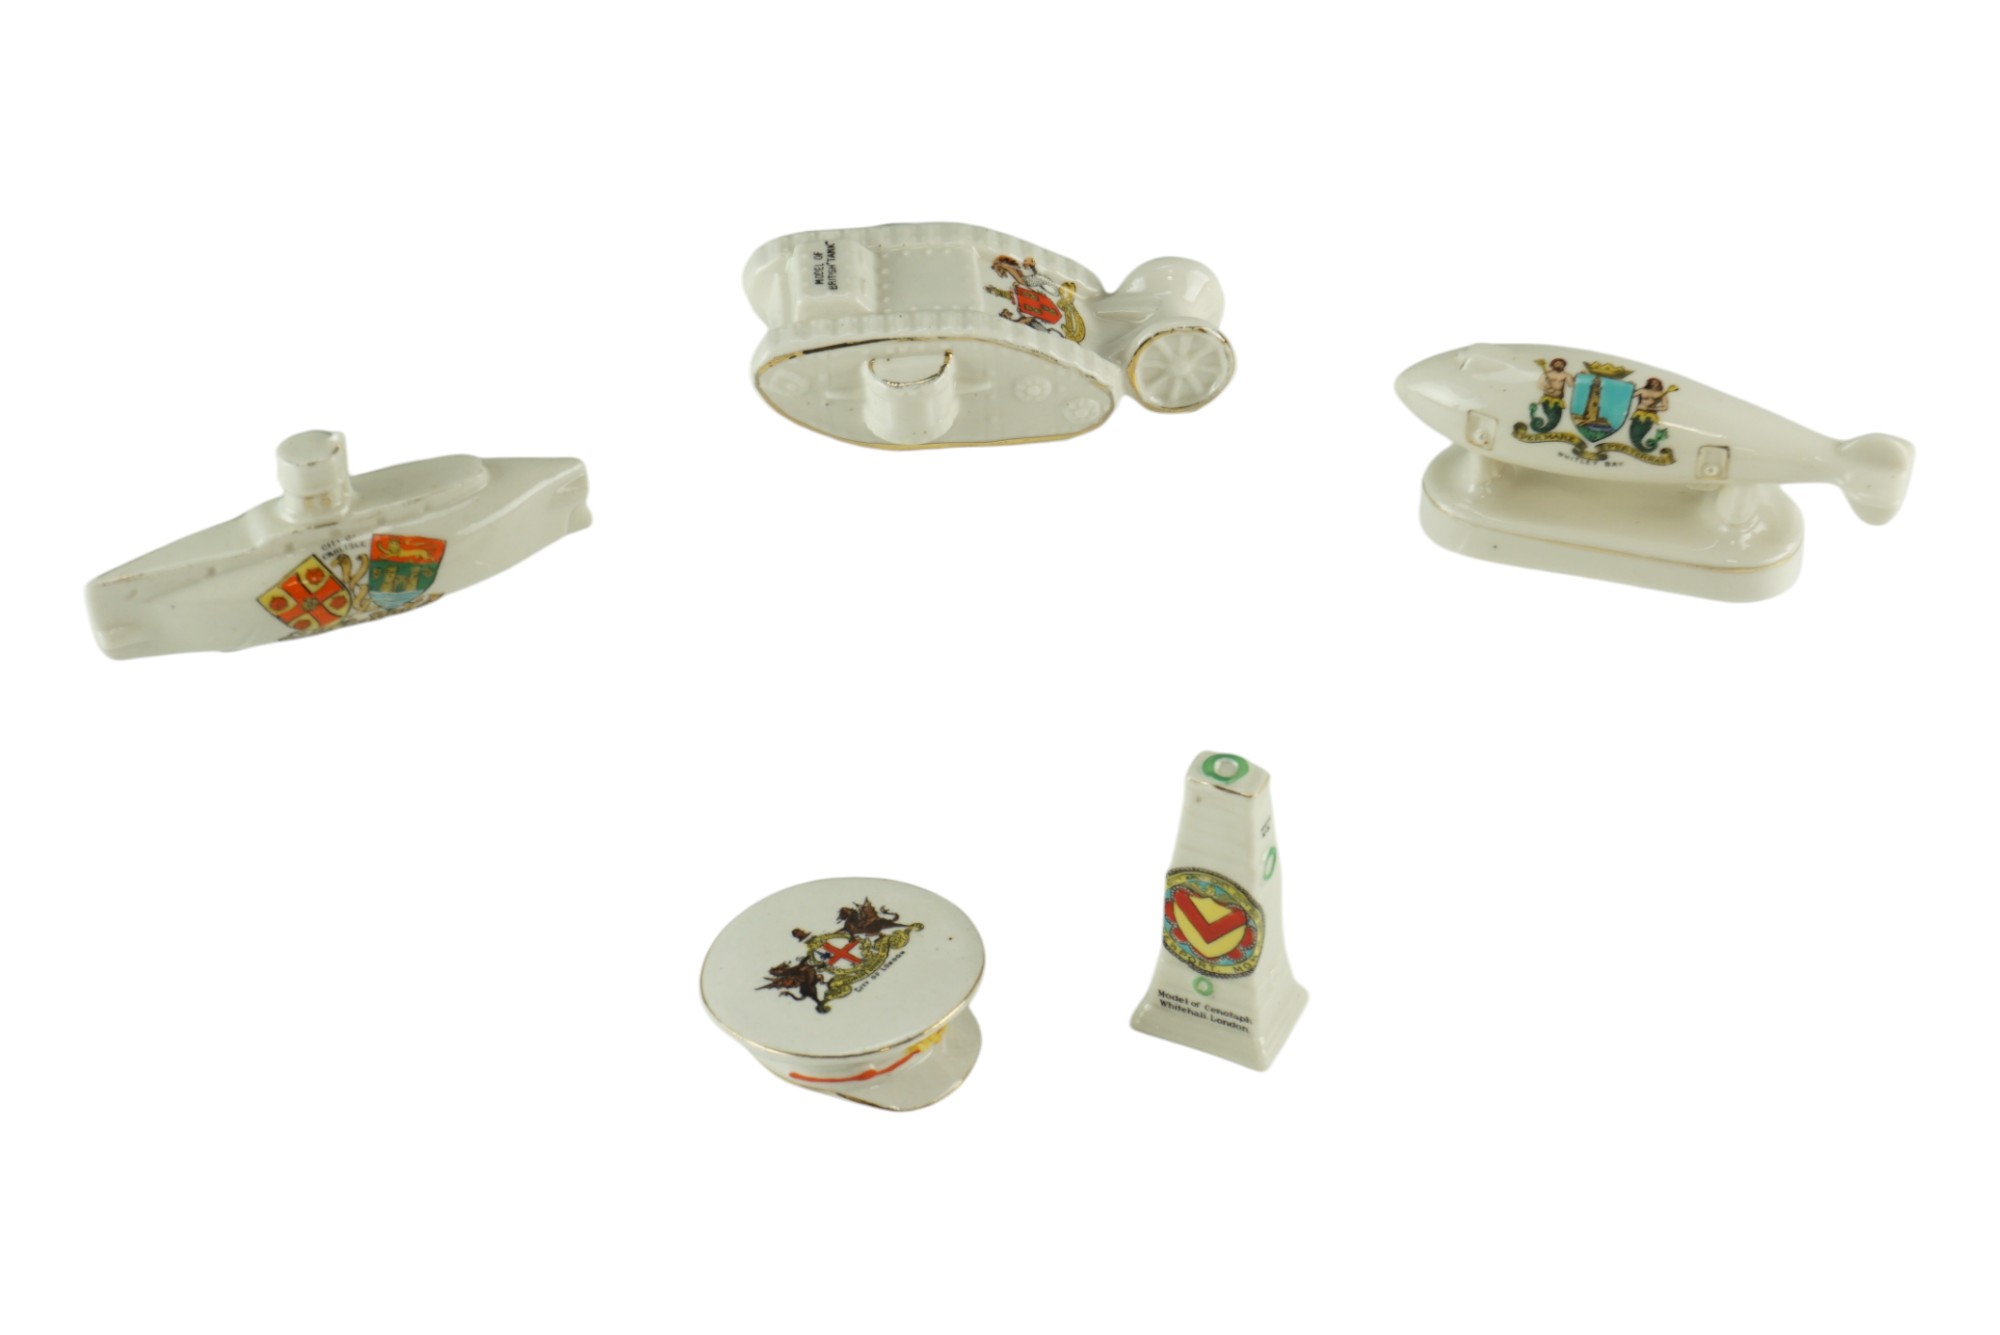 Five items of military Crested China including a Great War British tank, a submarine, a Zeppelin,